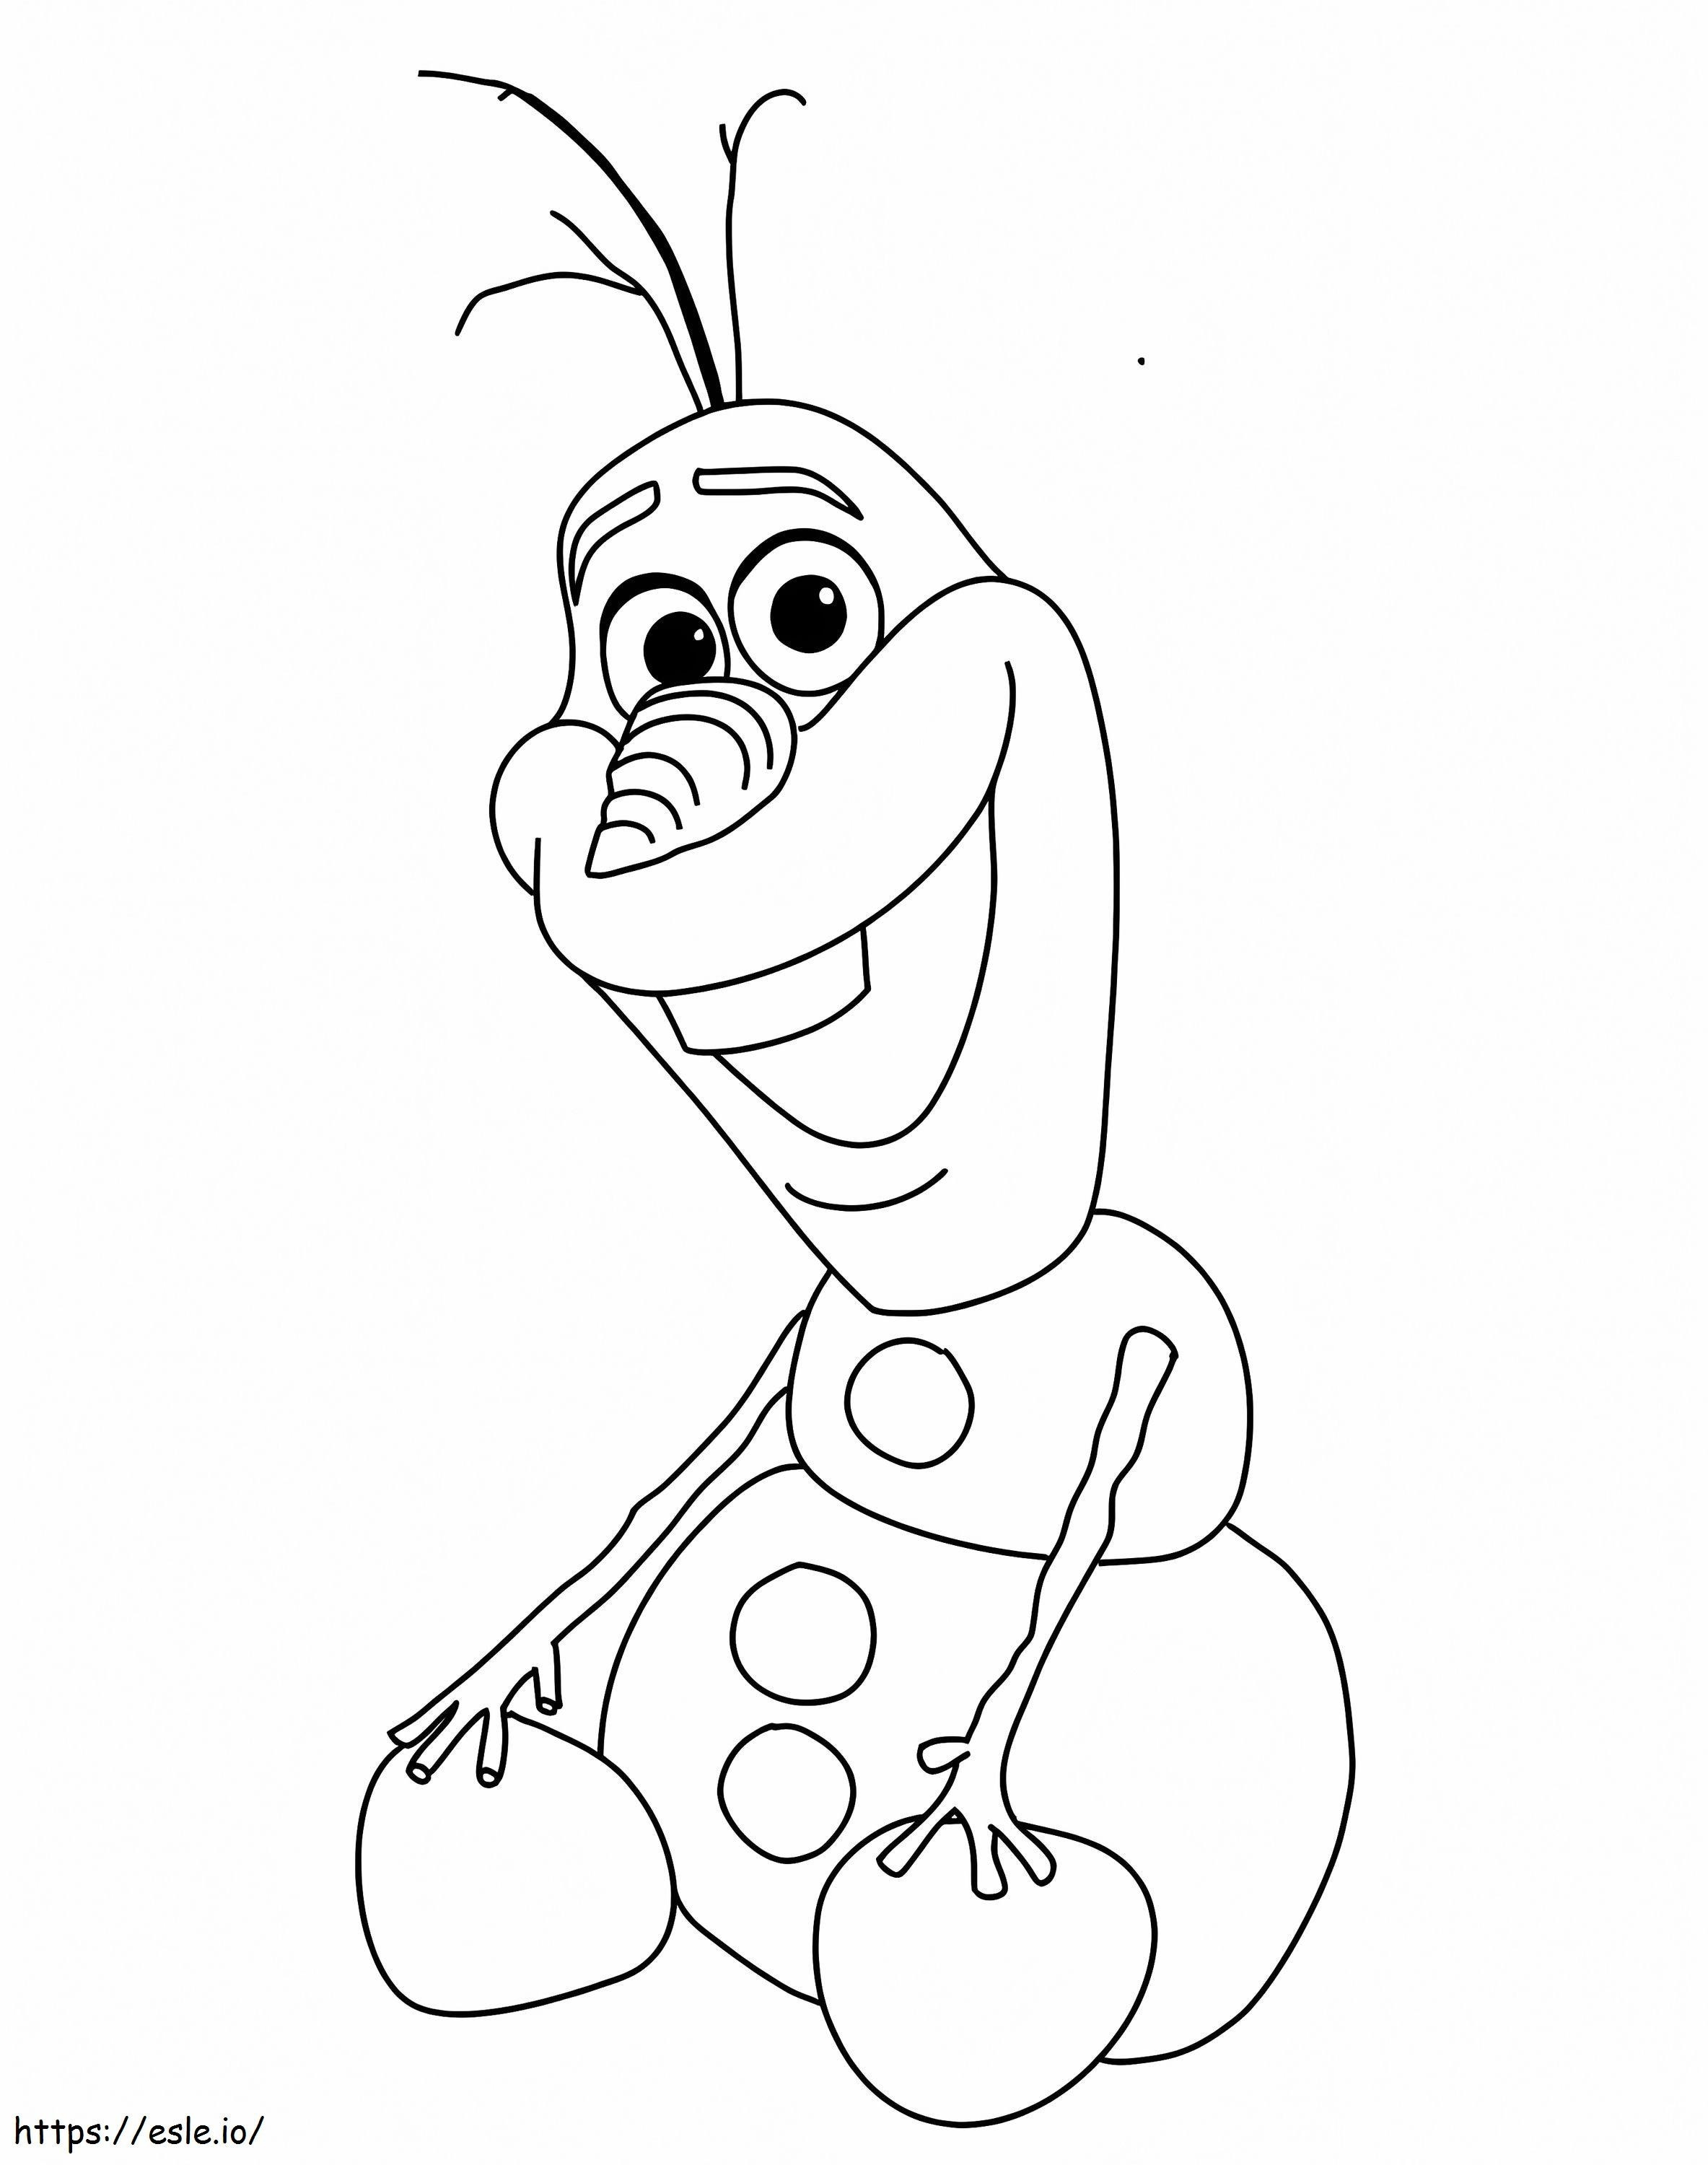 Olaf Sat coloring page